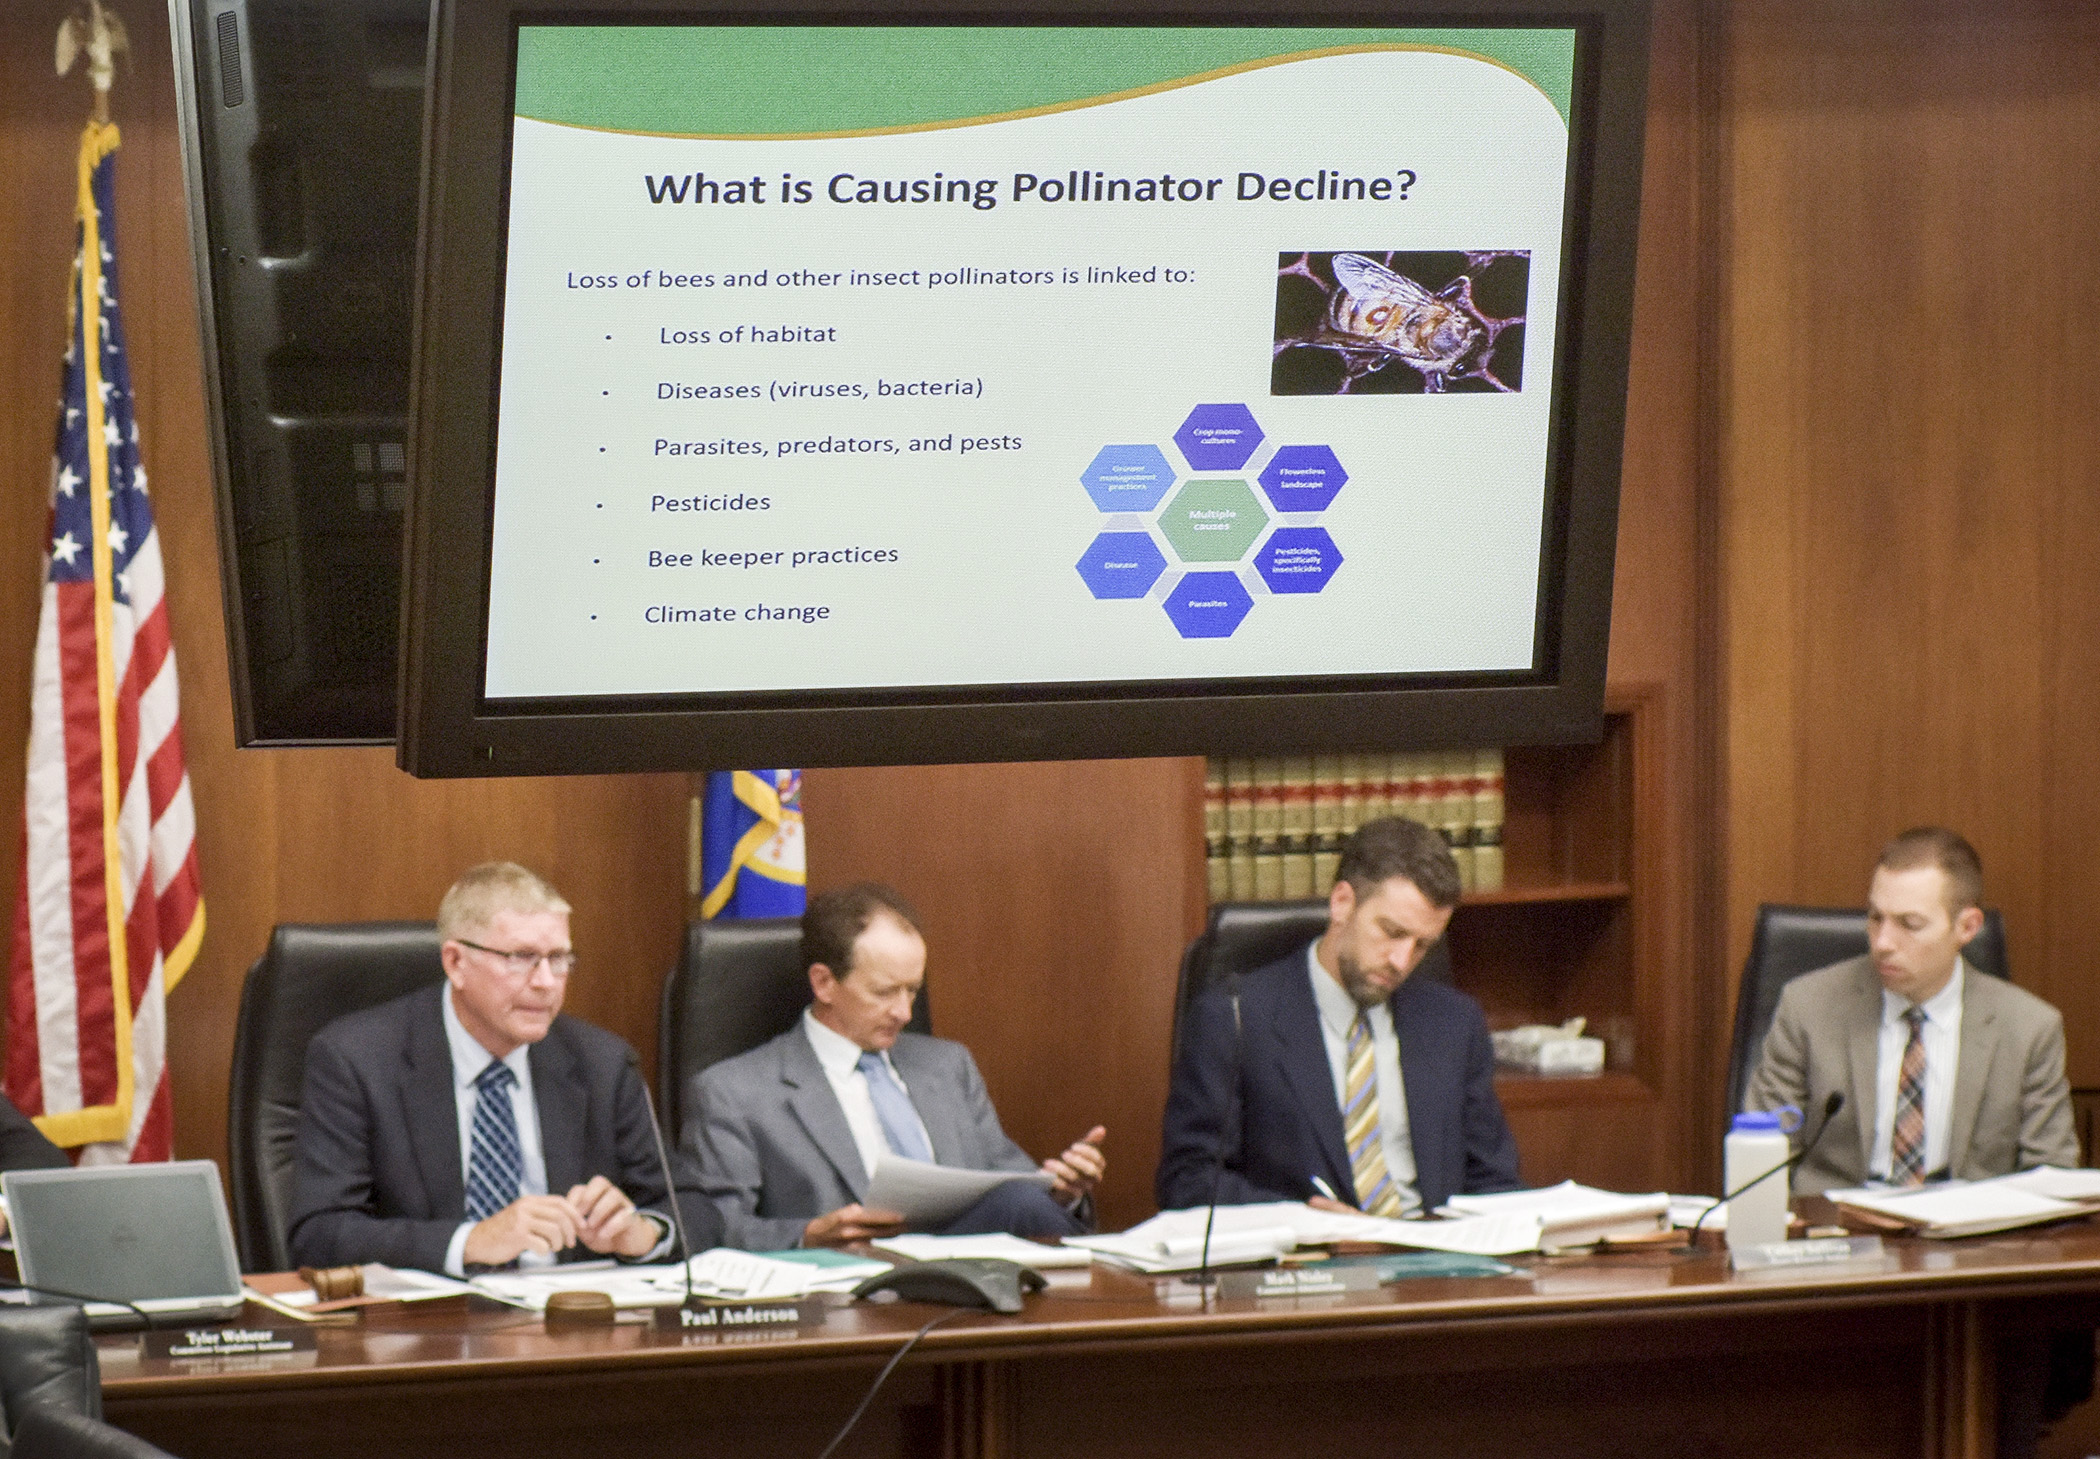 Members of the House Agriculture Policy Committee listen to, and view, a PowerPoint presentation by Department of Agriculture research scientist Raj Mann during an informational hearing on Gov. Mark Dayton's executive order to restore pollinator health in Minnesota. Photo by Andrew VonBank